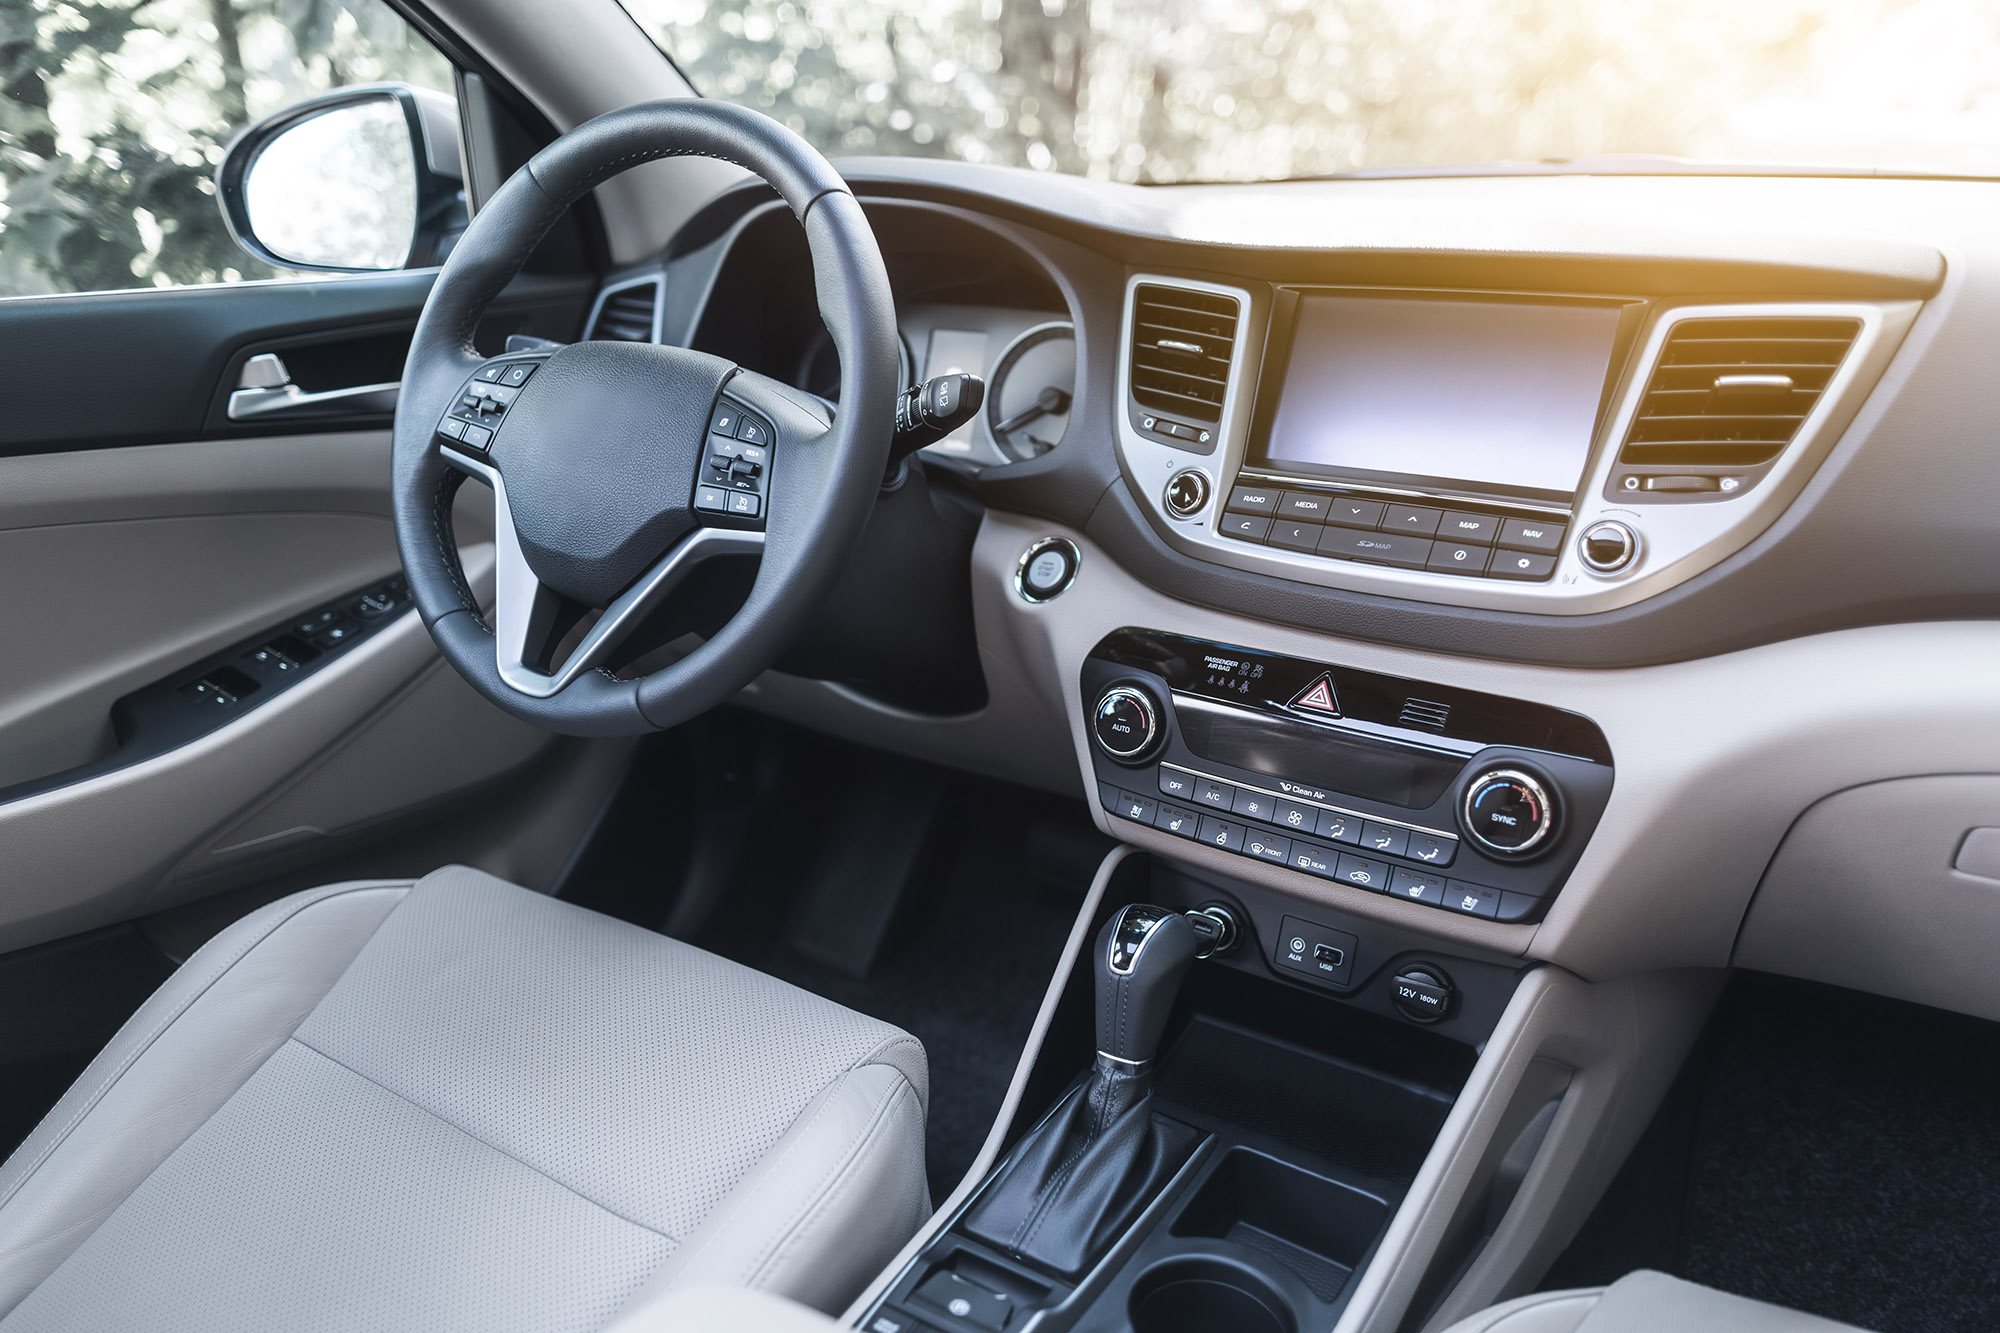 The new, polycarbonate-based LNP Elcrin copolymer resins can contain up to 75 percent recycled content and could find use in automotive exterior grilles, pillars and trim. 